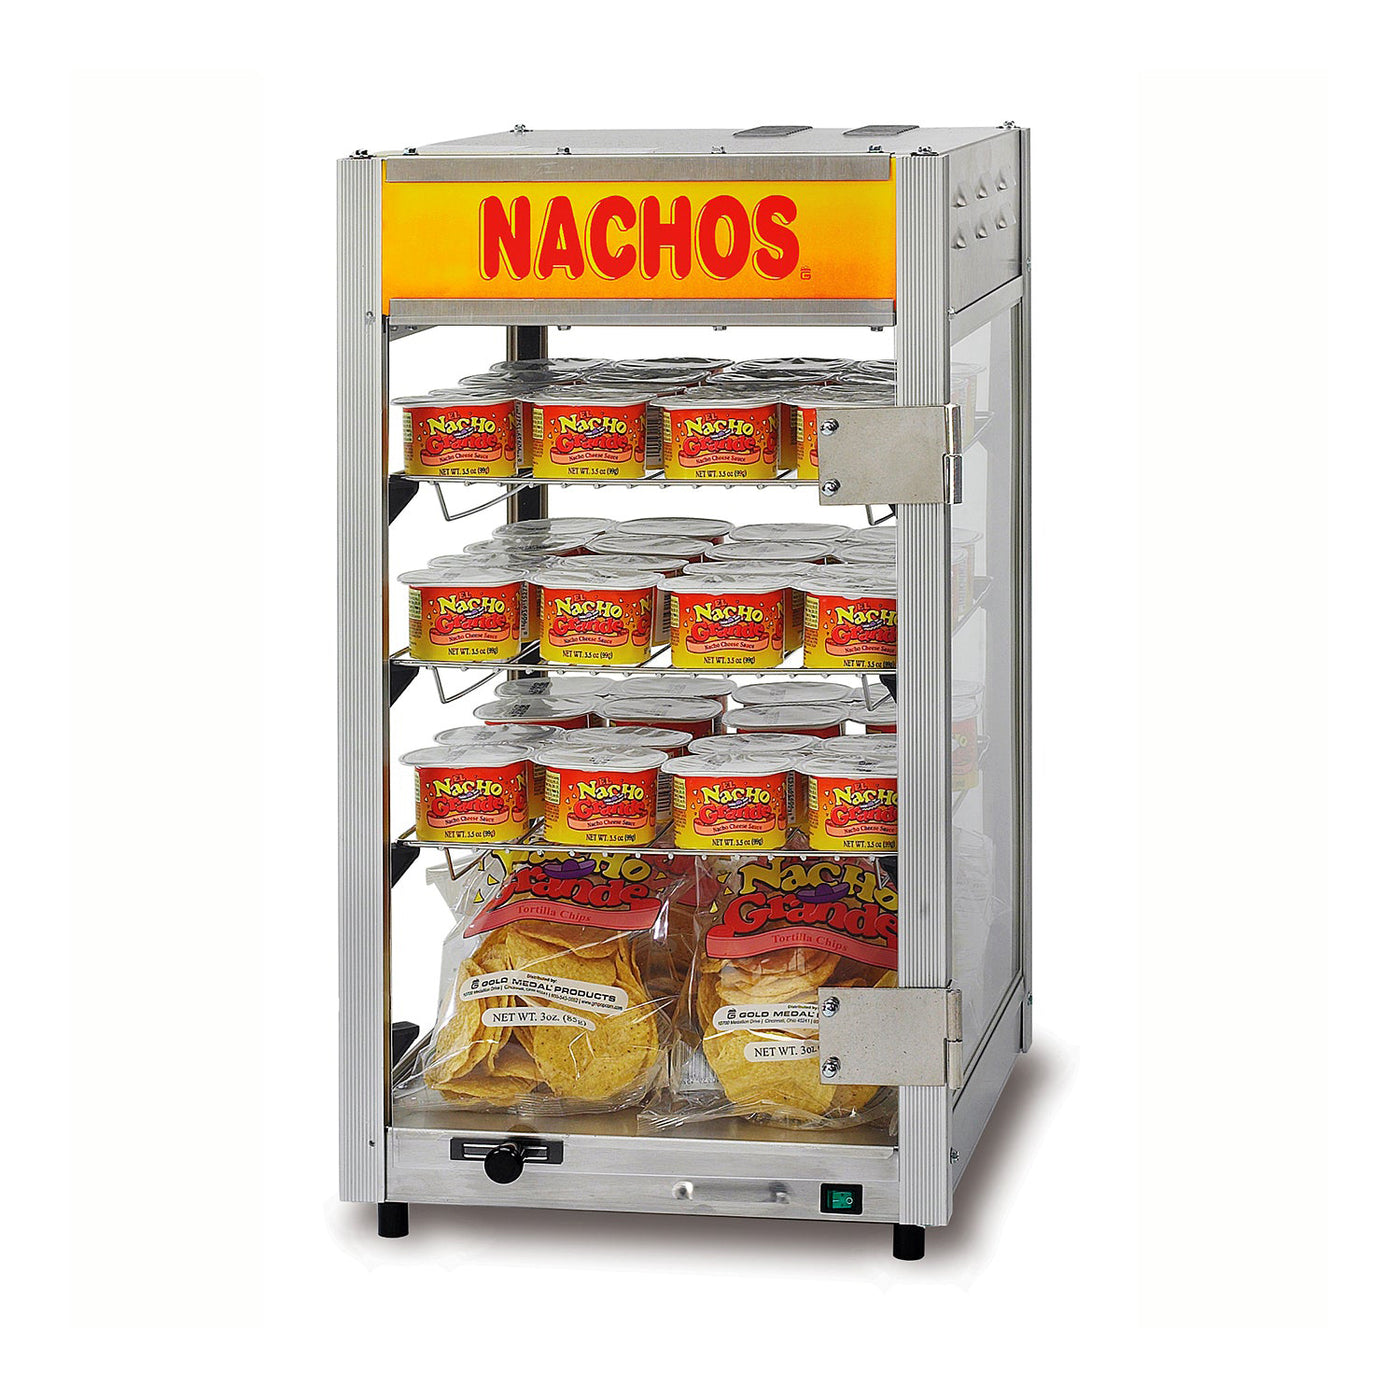 Gold Medal 4211C 27 1/4 Wide High-Output Twin Warmer / Server For Nacho  Cheese / Chocolate / Caramel Apple Dip, 120V 1440 Watts